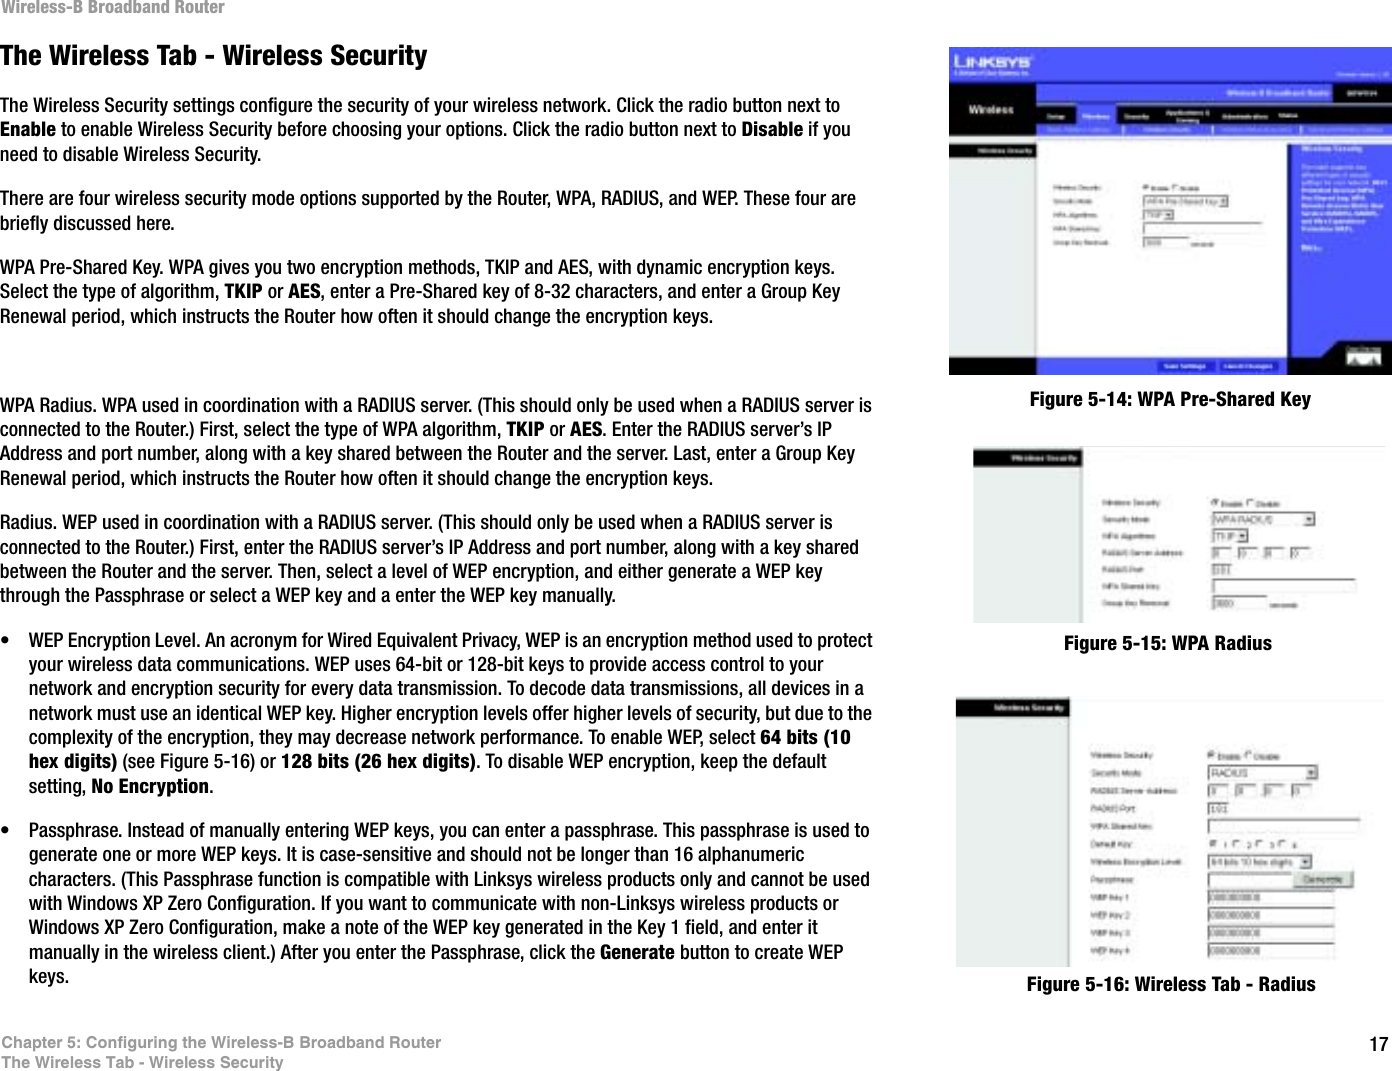 17Chapter 5: Configuring the Wireless-B Broadband RouterThe Wireless Tab - Wireless SecurityWireless-B Broadband RouterThe Wireless Tab - Wireless SecurityThe Wireless Security settings configure the security of your wireless network. Click the radio button next to Enable to enable Wireless Security before choosing your options. Click the radio button next to Disable if you need to disable Wireless Security.There are four wireless security mode options supported by the Router, WPA, RADIUS, and WEP. These four are briefly discussed here. WPA Pre-Shared Key. WPA gives you two encryption methods, TKIP and AES, with dynamic encryption keys. Select the type of algorithm, TKIP or AES, enter a Pre-Shared key of 8-32 characters, and enter a Group Key Renewal period, which instructs the Router how often it should change the encryption keys.WPA Radius. WPA used in coordination with a RADIUS server. (This should only be used when a RADIUS server is connected to the Router.) First, select the type of WPA algorithm, TKIP or AES. Enter the RADIUS server’s IP Address and port number, along with a key shared between the Router and the server. Last, enter a Group Key Renewal period, which instructs the Router how often it should change the encryption keys.Radius. WEP used in coordination with a RADIUS server. (This should only be used when a RADIUS server is connected to the Router.) First, enter the RADIUS server’s IP Address and port number, along with a key shared between the Router and the server. Then, select a level of WEP encryption, and either generate a WEP key through the Passphrase or select a WEP key and a enter the WEP key manually.• WEP Encryption Level. An acronym for Wired Equivalent Privacy, WEP is an encryption method used to protect your wireless data communications. WEP uses 64-bit or 128-bit keys to provide access control to your network and encryption security for every data transmission. To decode data transmissions, all devices in a network must use an identical WEP key. Higher encryption levels offer higher levels of security, but due to the complexity of the encryption, they may decrease network performance. To enable WEP, select 64 bits (10 hex digits) (see Figure 5-16) or 128 bits (26 hex digits). To disable WEP encryption, keep the default setting, No Encryption.• Passphrase. Instead of manually entering WEP keys, you can enter a passphrase. This passphrase is used to generate one or more WEP keys. It is case-sensitive and should not be longer than 16 alphanumeric characters. (This Passphrase function is compatible with Linksys wireless products only and cannot be used with Windows XP Zero Configuration. If you want to communicate with non-Linksys wireless products or Windows XP Zero Configuration, make a note of the WEP key generated in the Key 1 field, and enter it manually in the wireless client.) After you enter the Passphrase, click the Generate button to create WEP keys. Figure 5-14: WPA Pre-Shared KeyFigure 5-15: WPA RadiusFigure 5-16: Wireless Tab - Radius